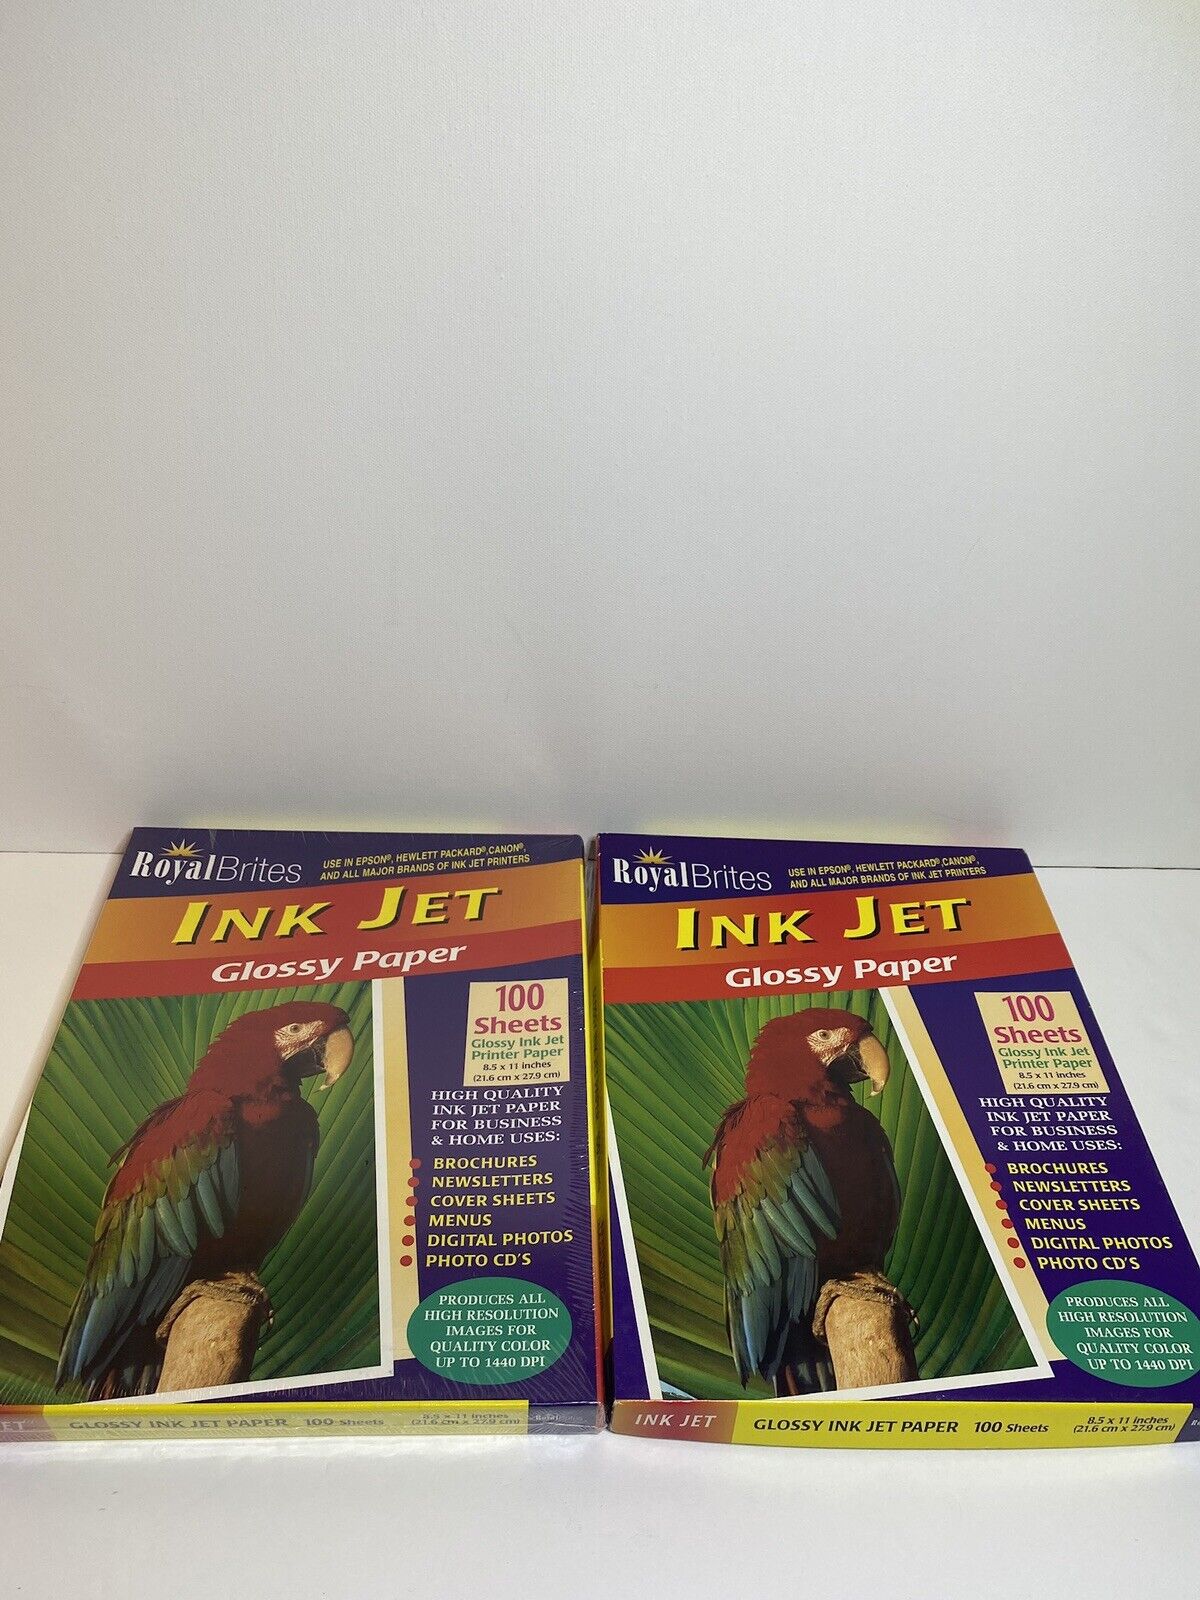 Royal Brites Ink Jet High Gloss Photo Paper 8.5 x 11 Glossy Picture. Lot Of 2